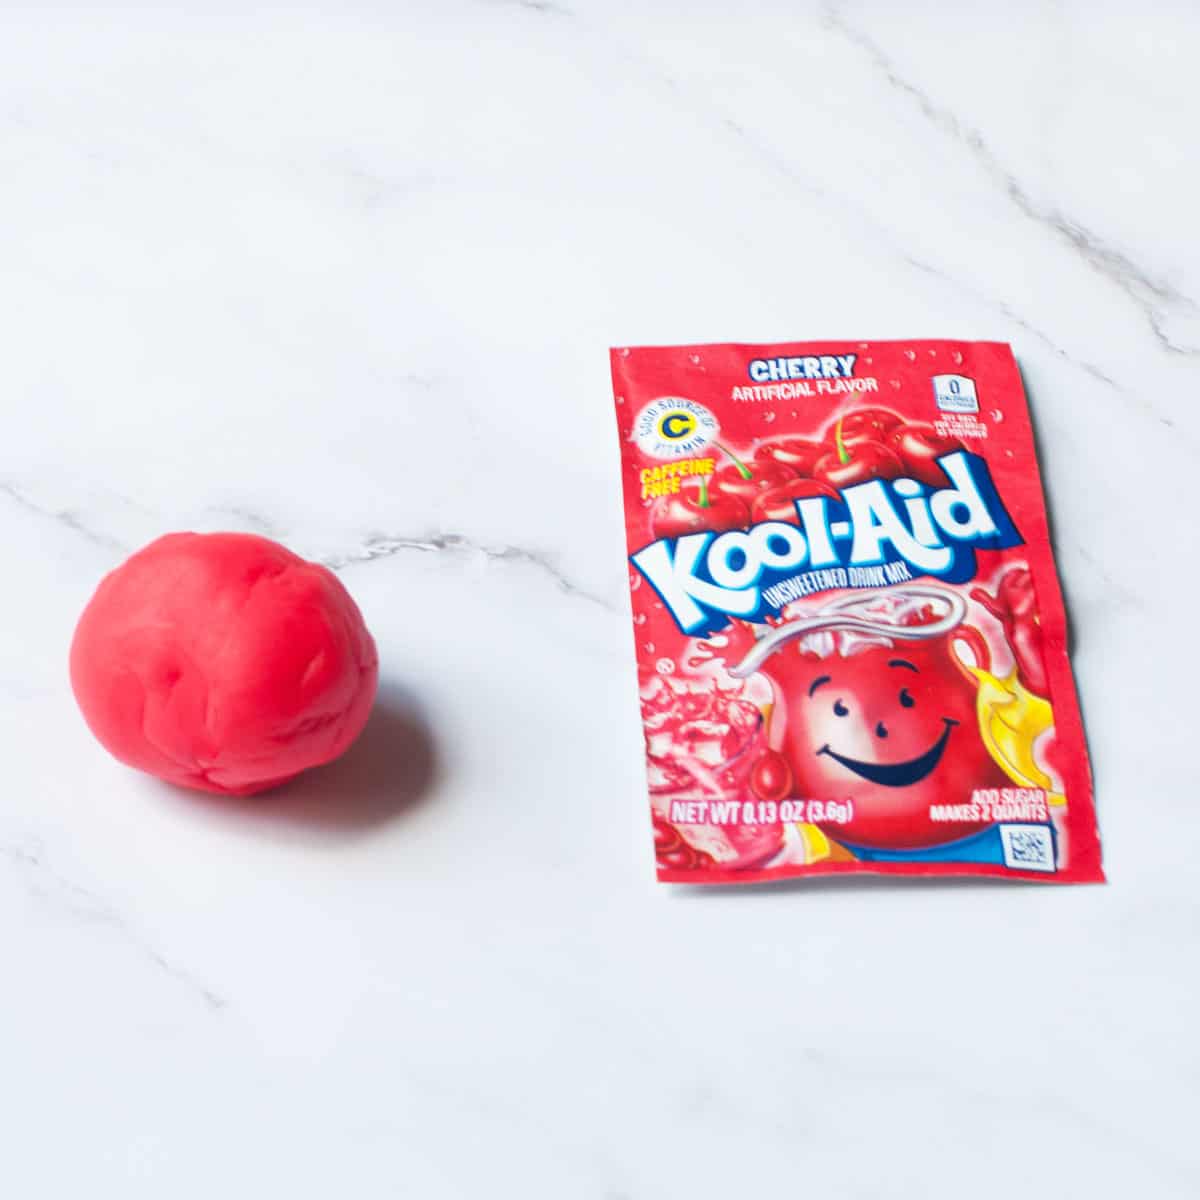 a red kool aid packet and small ball of red play dough